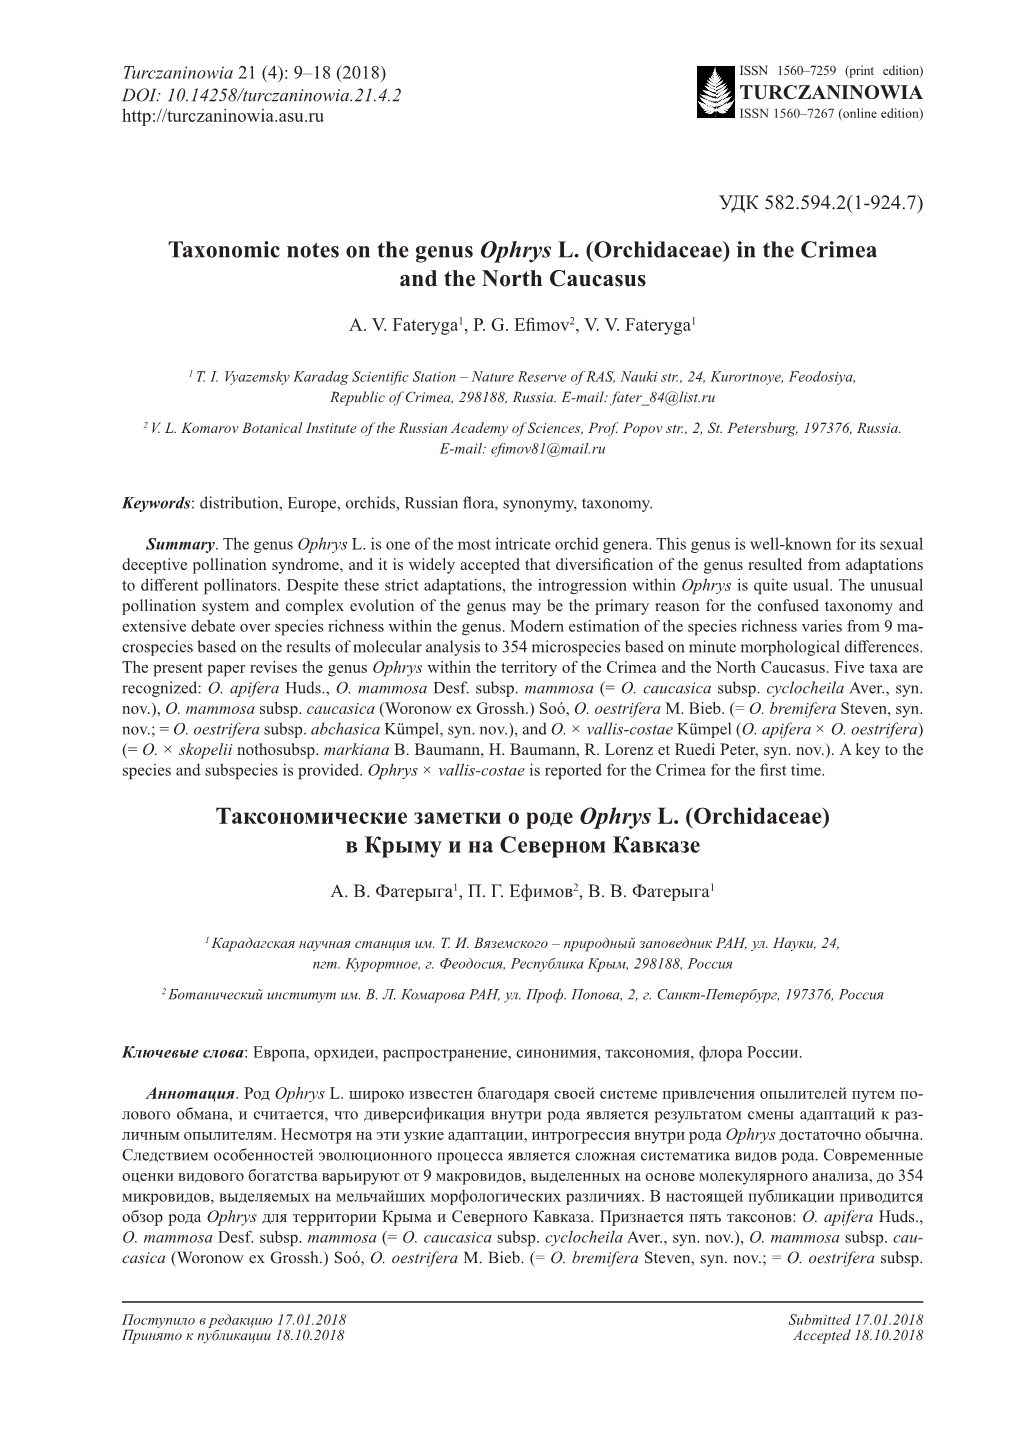 Taxonomic Notes on the Genus Ophrys L. (Orchidaceae) in the Crimea and the North Caucasus